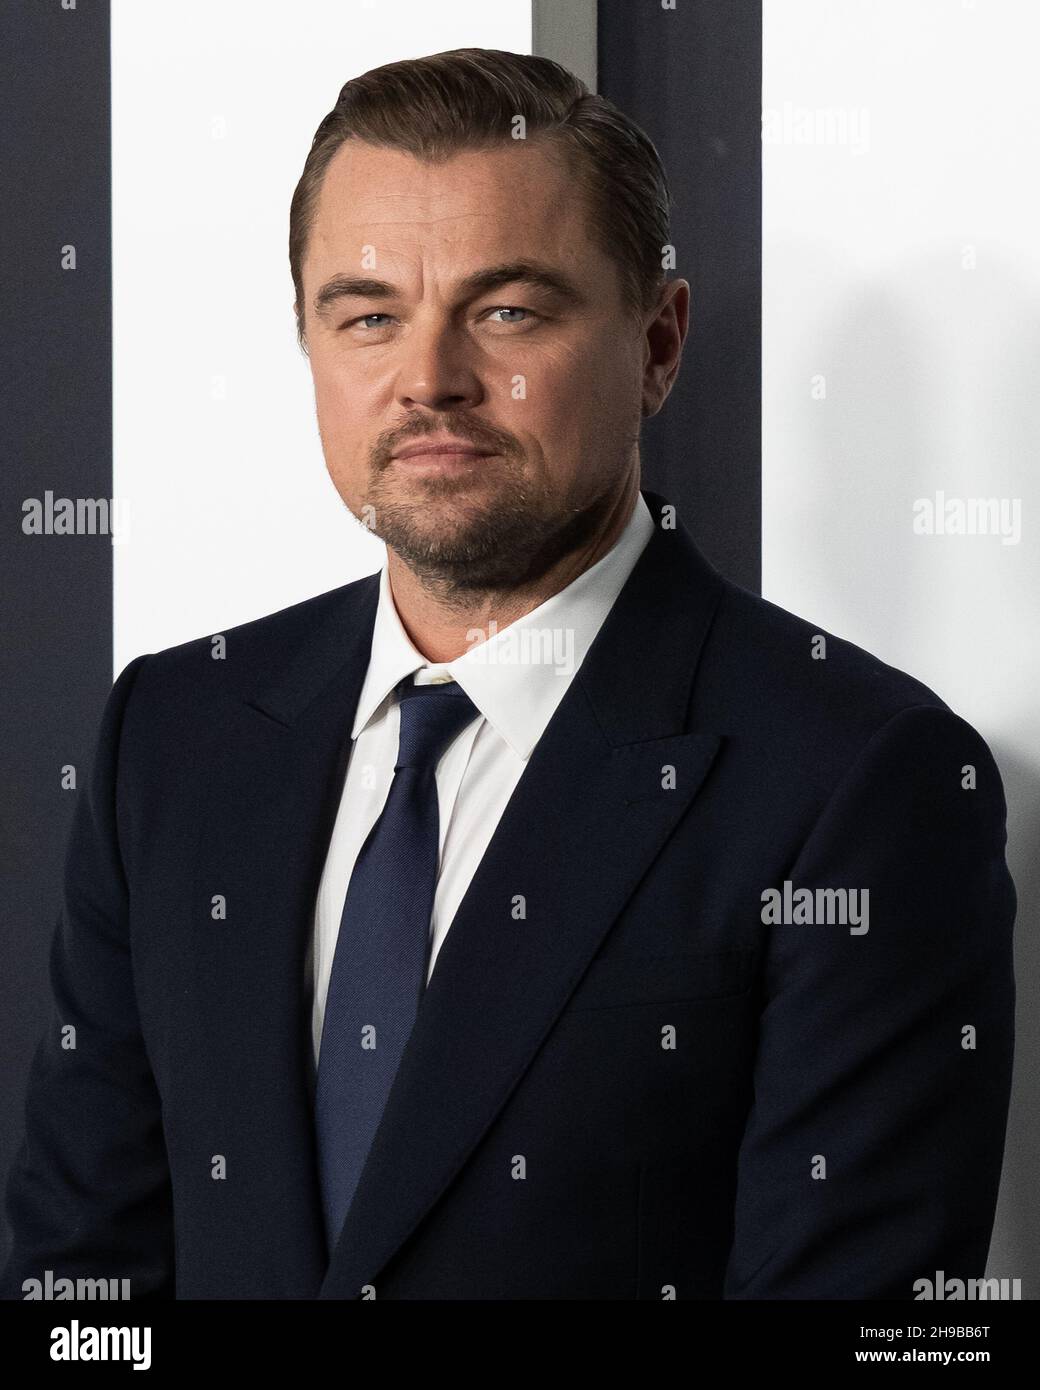 New York, USA. 05th Dec, 2021. Leonardo DiCaprio attends the world premiere of the Netflix star-studded comedy “Don't Look Up” at Jazz at Lincoln Center in New York, New York, on Dec. 5, 2021. (Photo by Gabriele Holtermann/Sipa USA) Credit: Sipa USA/Alamy Live News Stock Photo